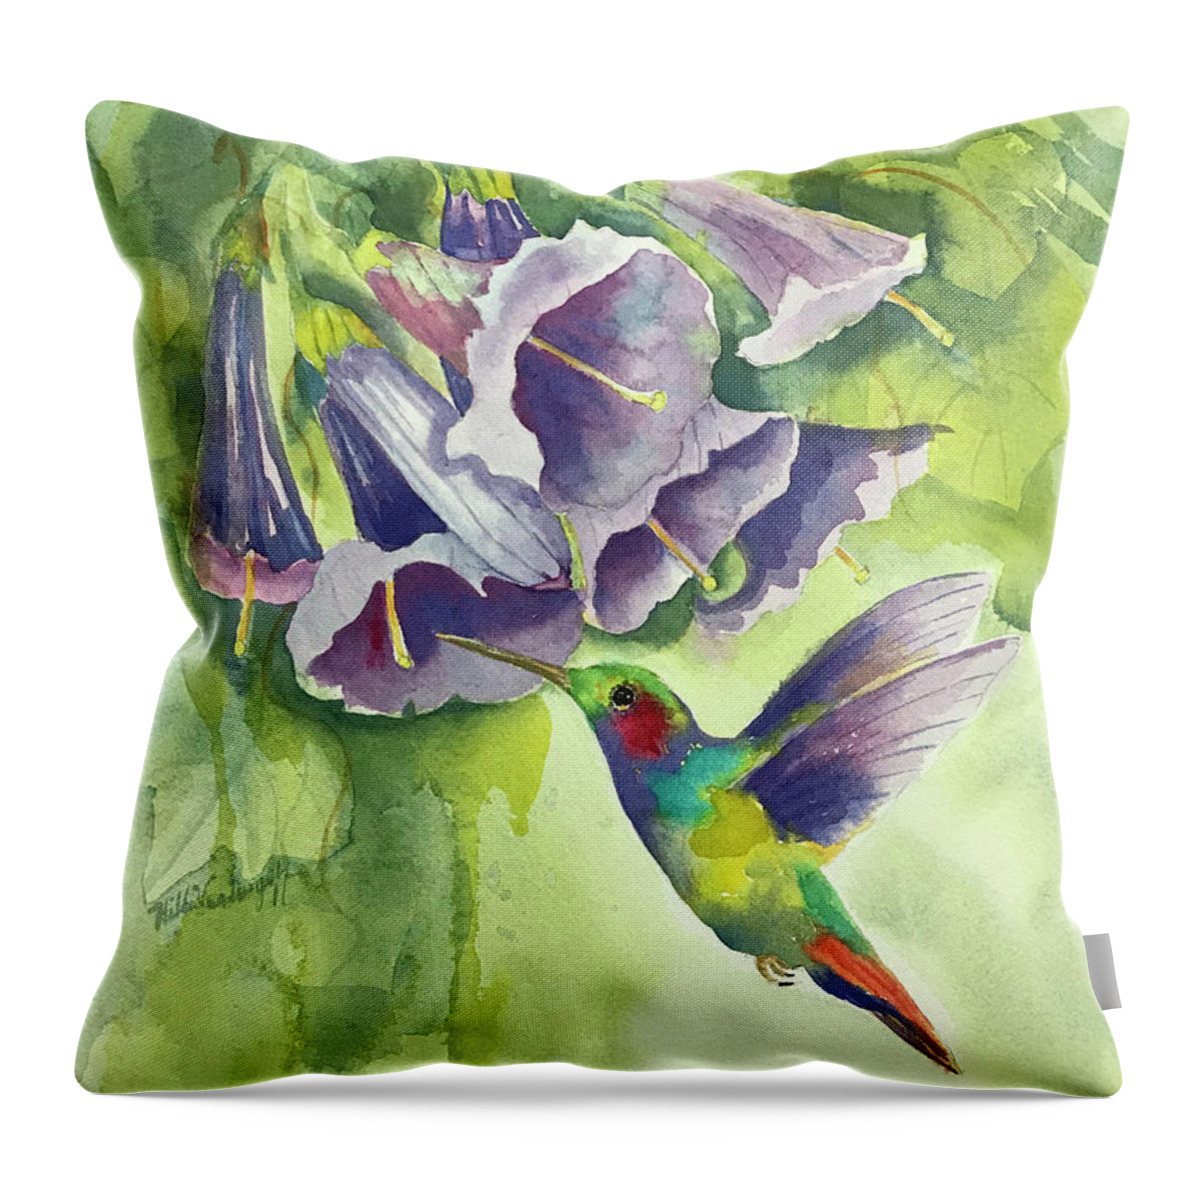 Hummingbird Throw Pillow featuring the painting Hummingbird and Trumpets by Hilda Vandergriff